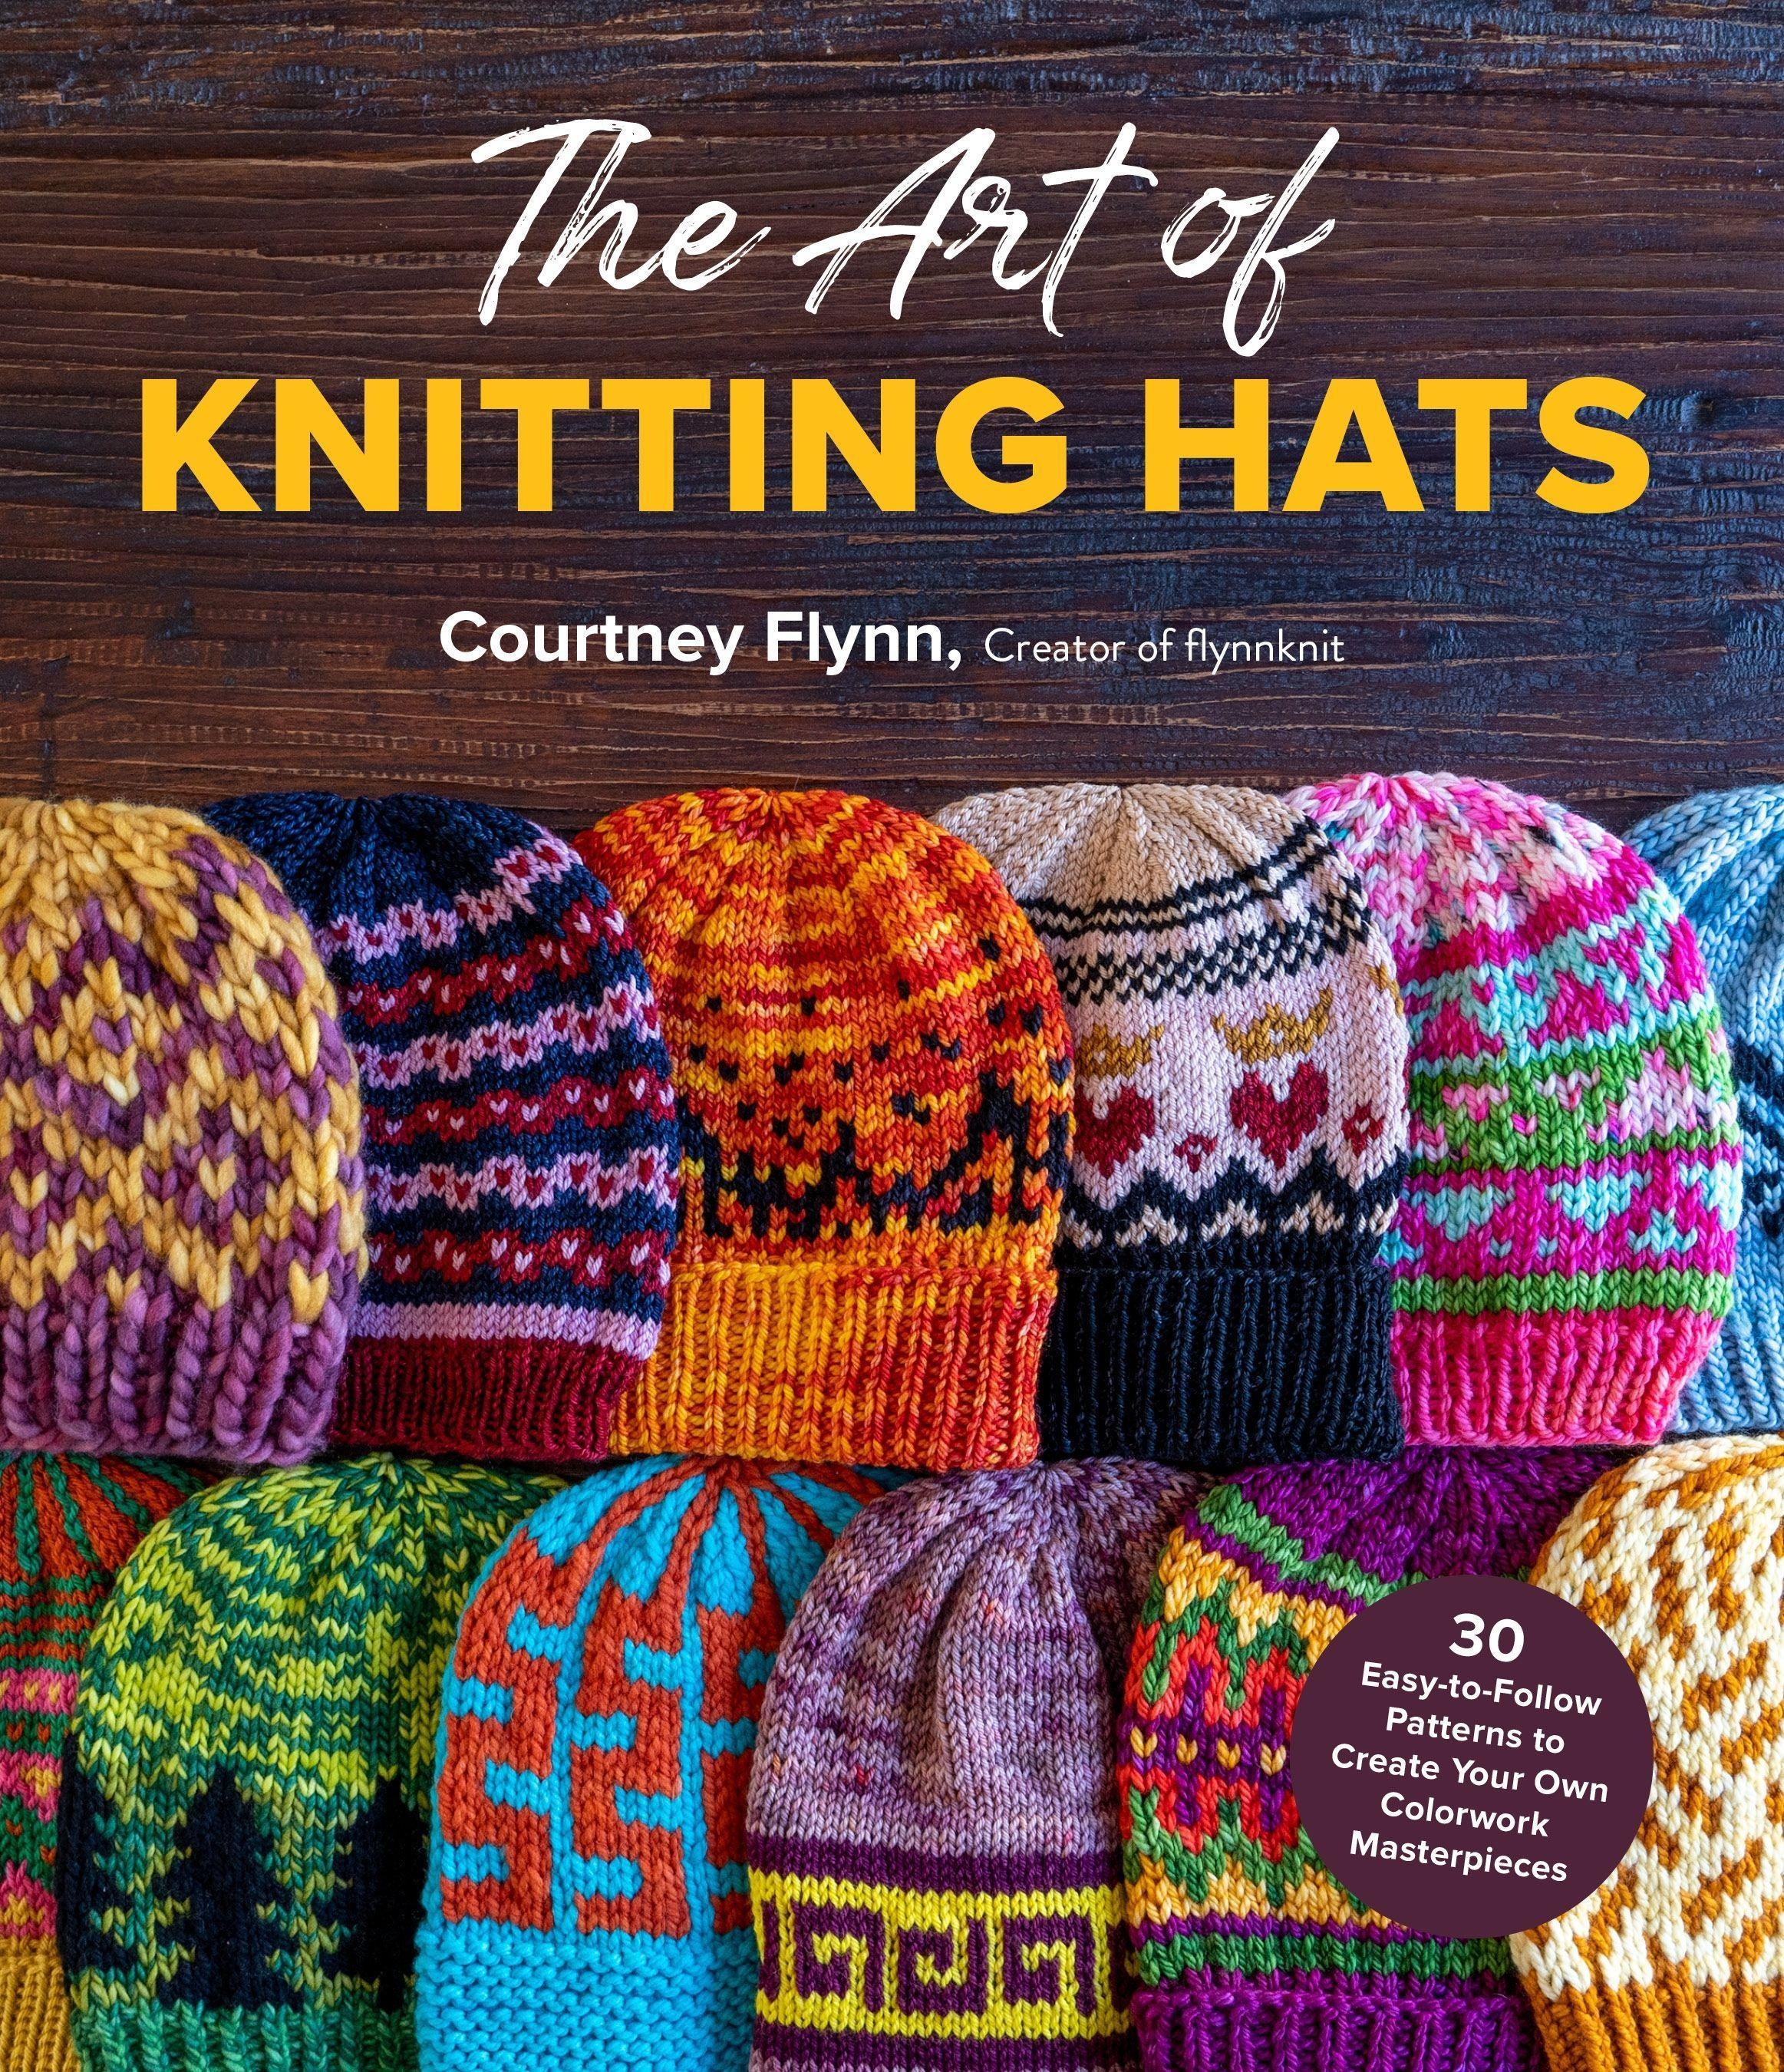 Amazing Knit Hats: 30 Colorwork Patterns to Create Wearable Works of Art, Ratgeber